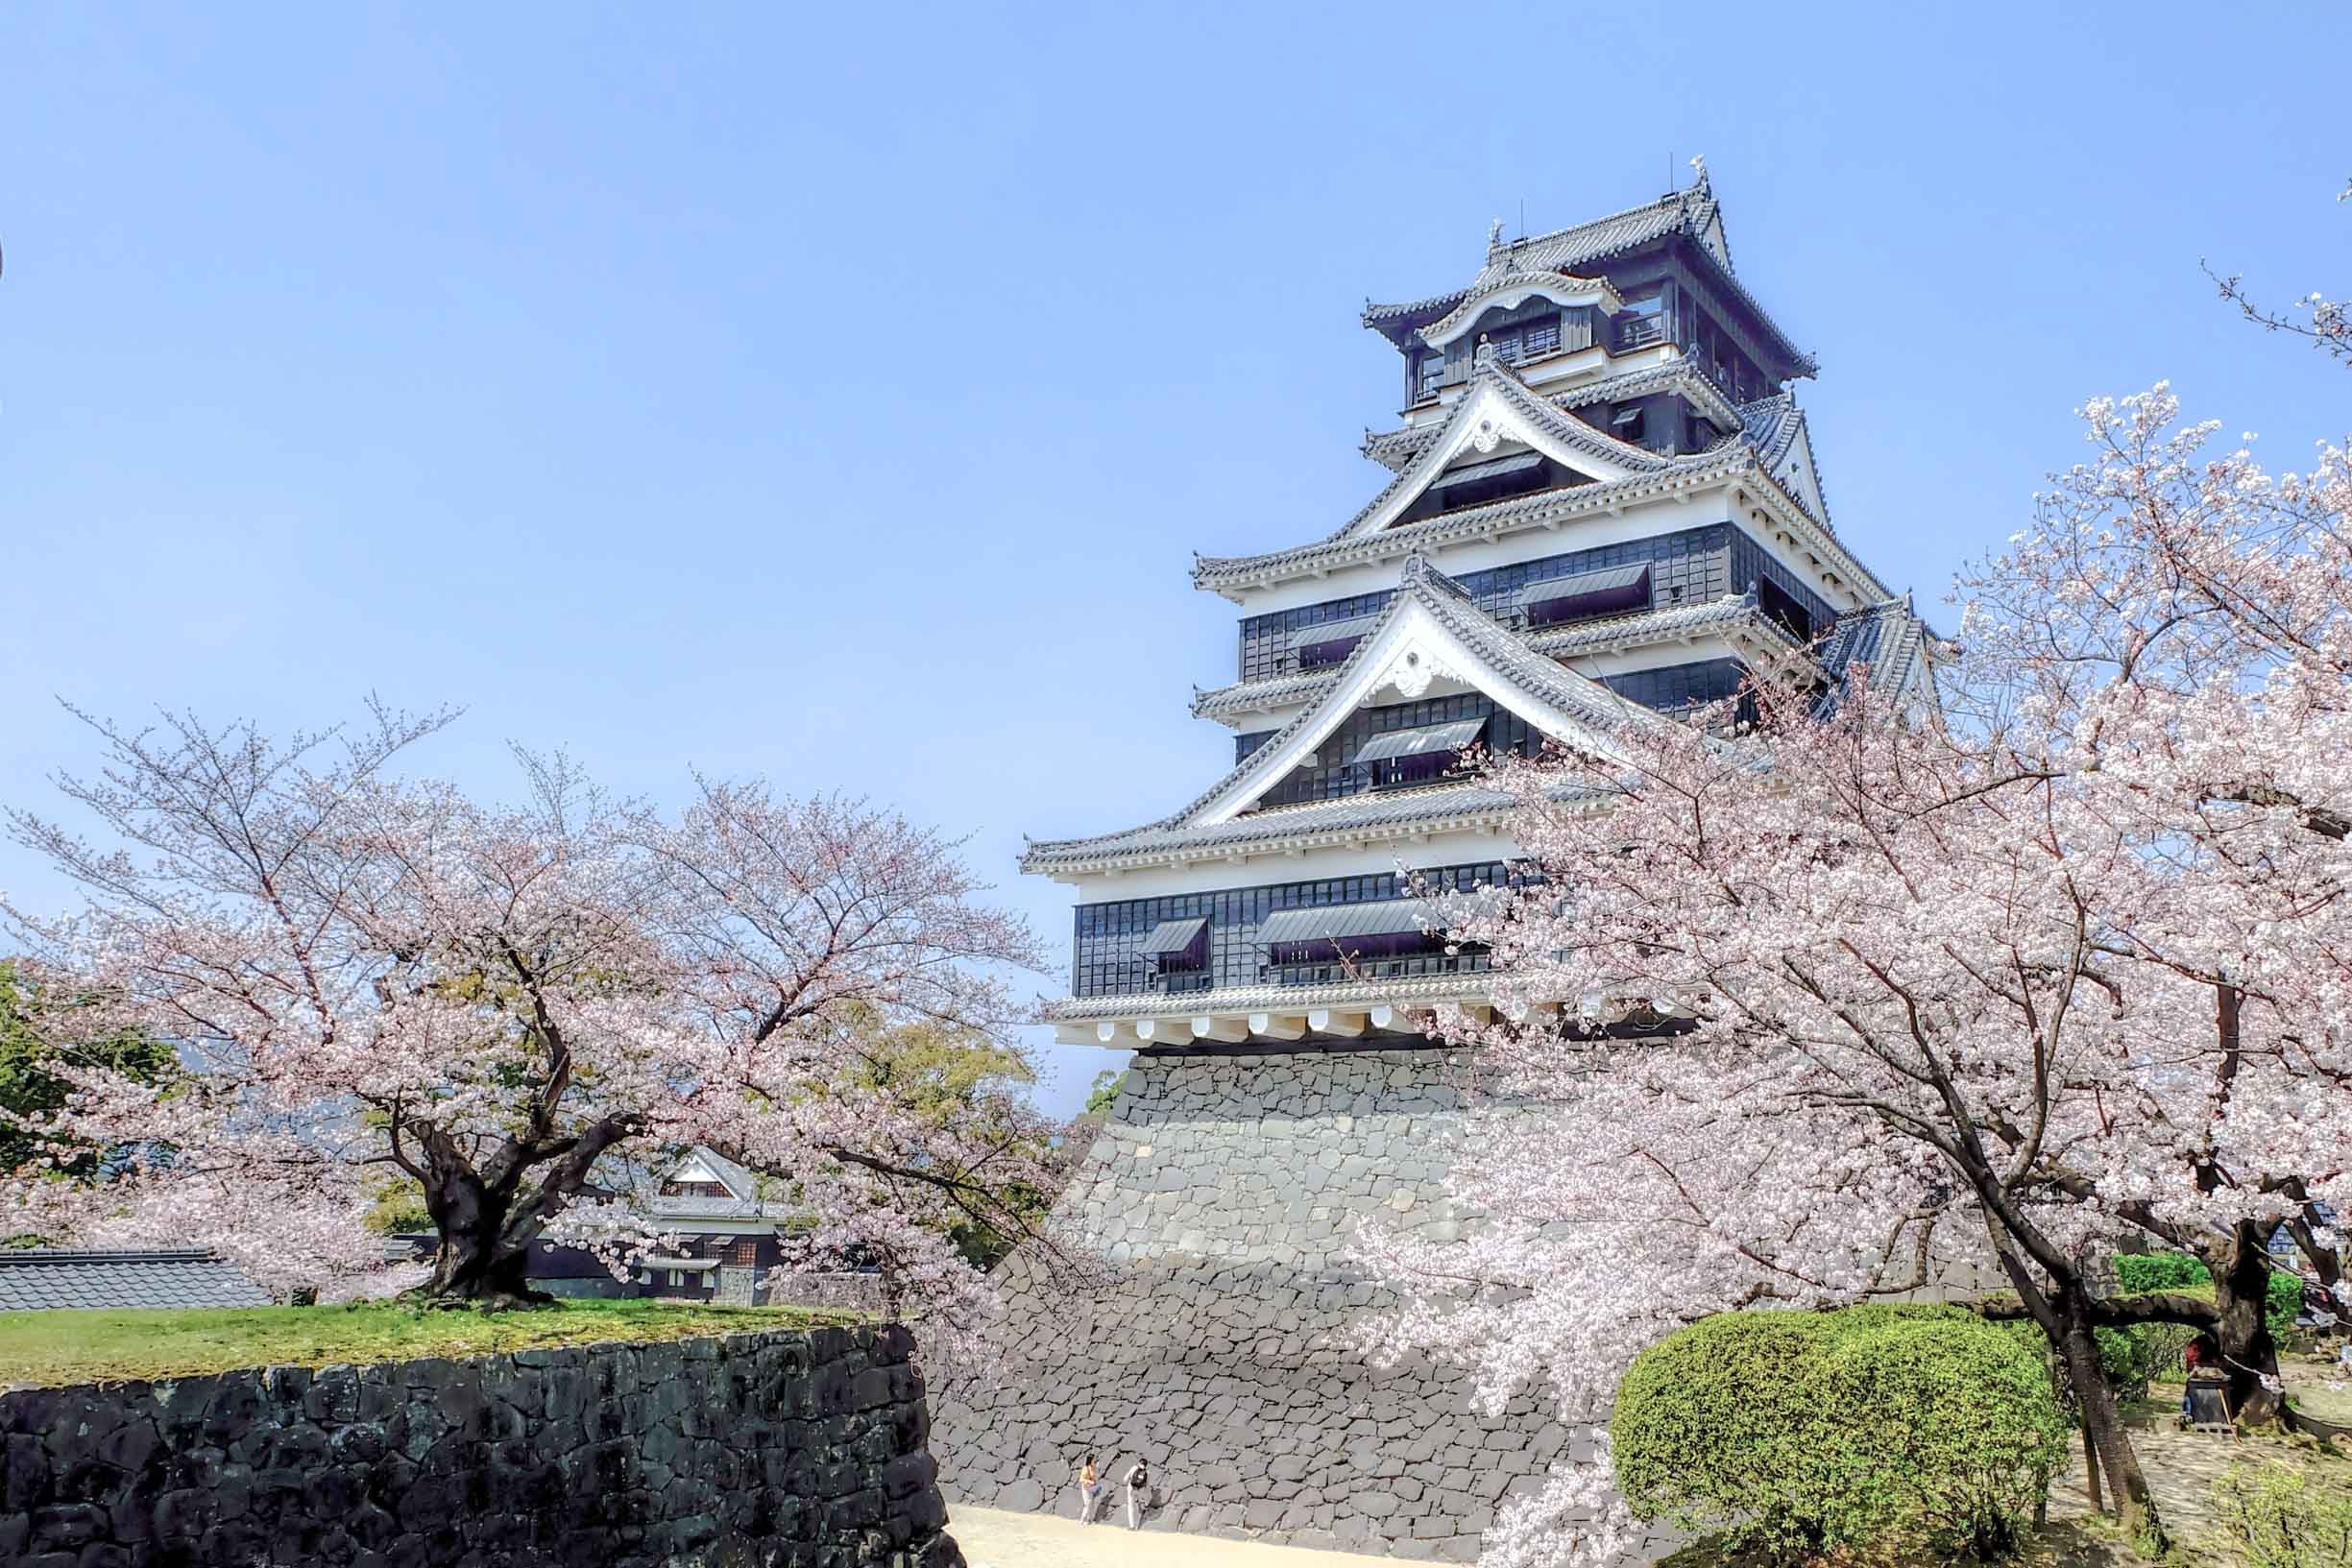 Kumamoto Japan - All You Need To Know To Visit This City and its castle